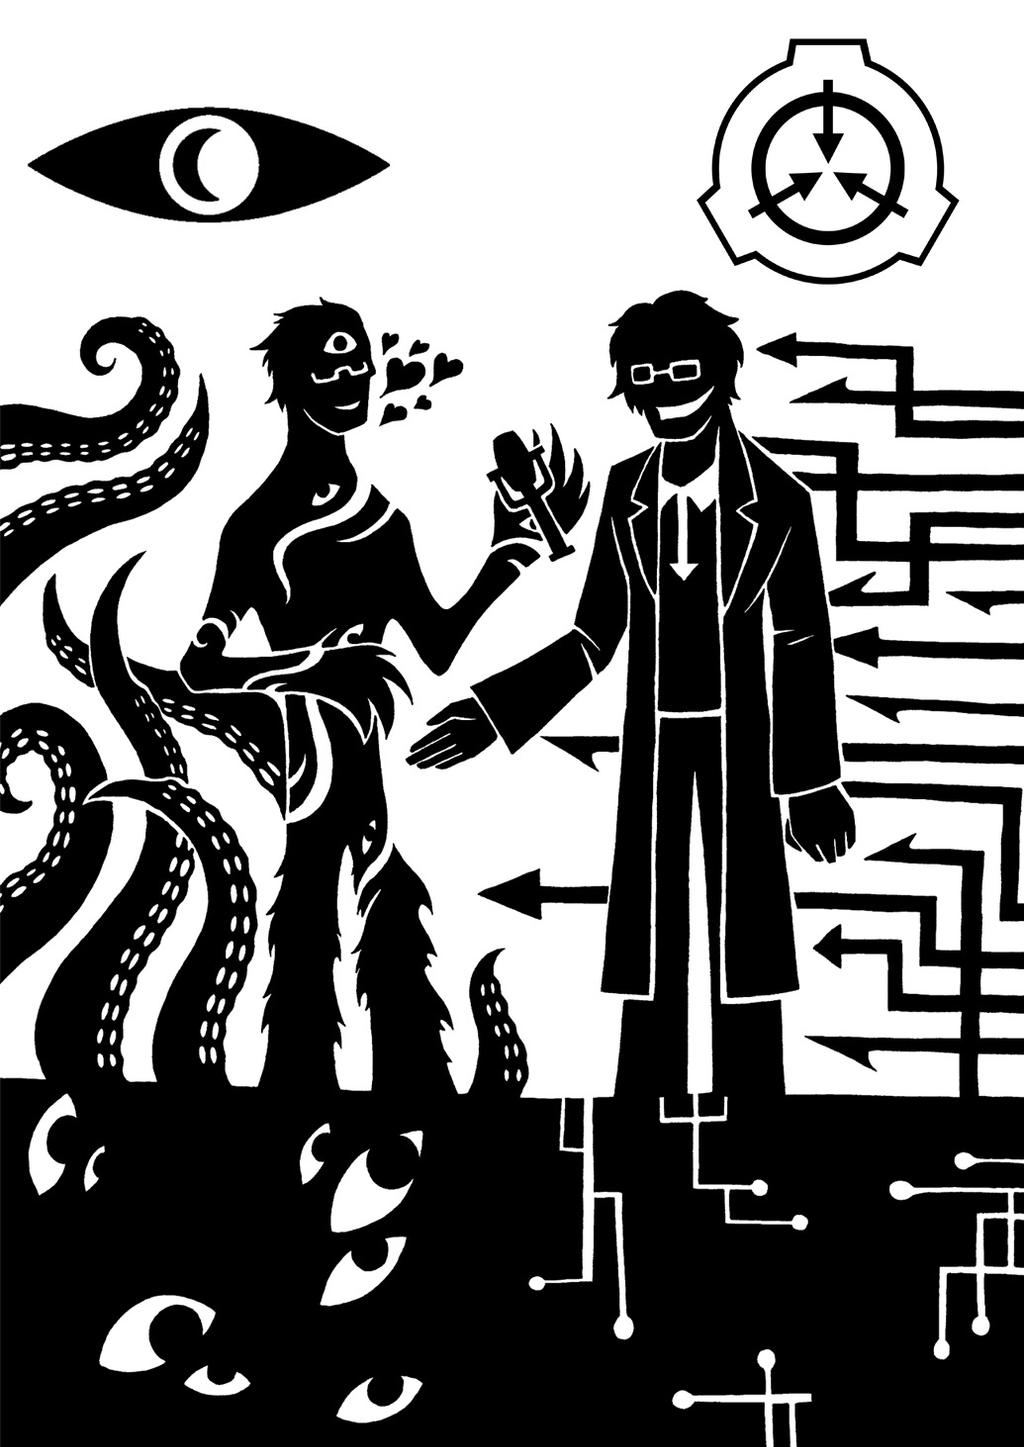 night_vale_scp_foundation_crossover_by_sunnyparallax-d7wupz3.jpg